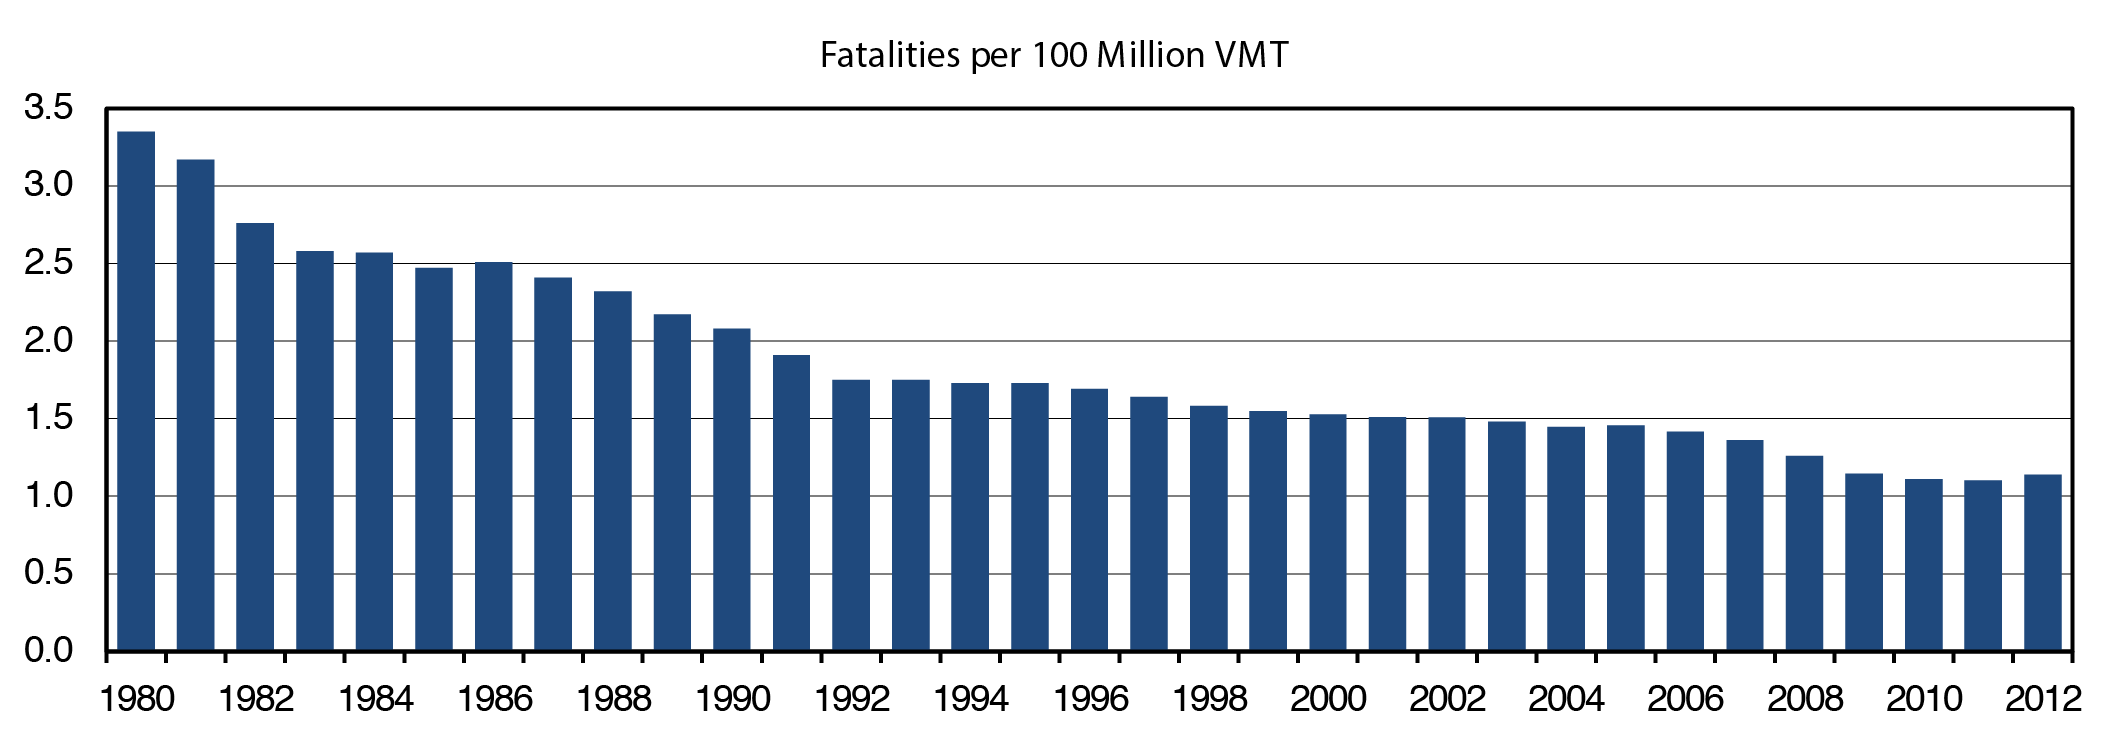 A bar chart shows the change in rate of fatalities per 100 million VMT over the time period 1980 to 2012. From an initial value of 3.35 in 1980, the trend shows a swing down to a value of 2.47 in 1985, a slight increase to a value of 2.51 in 1986, then a swing down to a value of 1.75 in 1992. After tracking along this value through 1995, the trend continues downward to a value of 1.36 in 2007, and drops off to end at a value of 1.14 in 2012. Source: Fatality Analysis Reporting System/National Center for Statistics and Analysis, NHTSA.